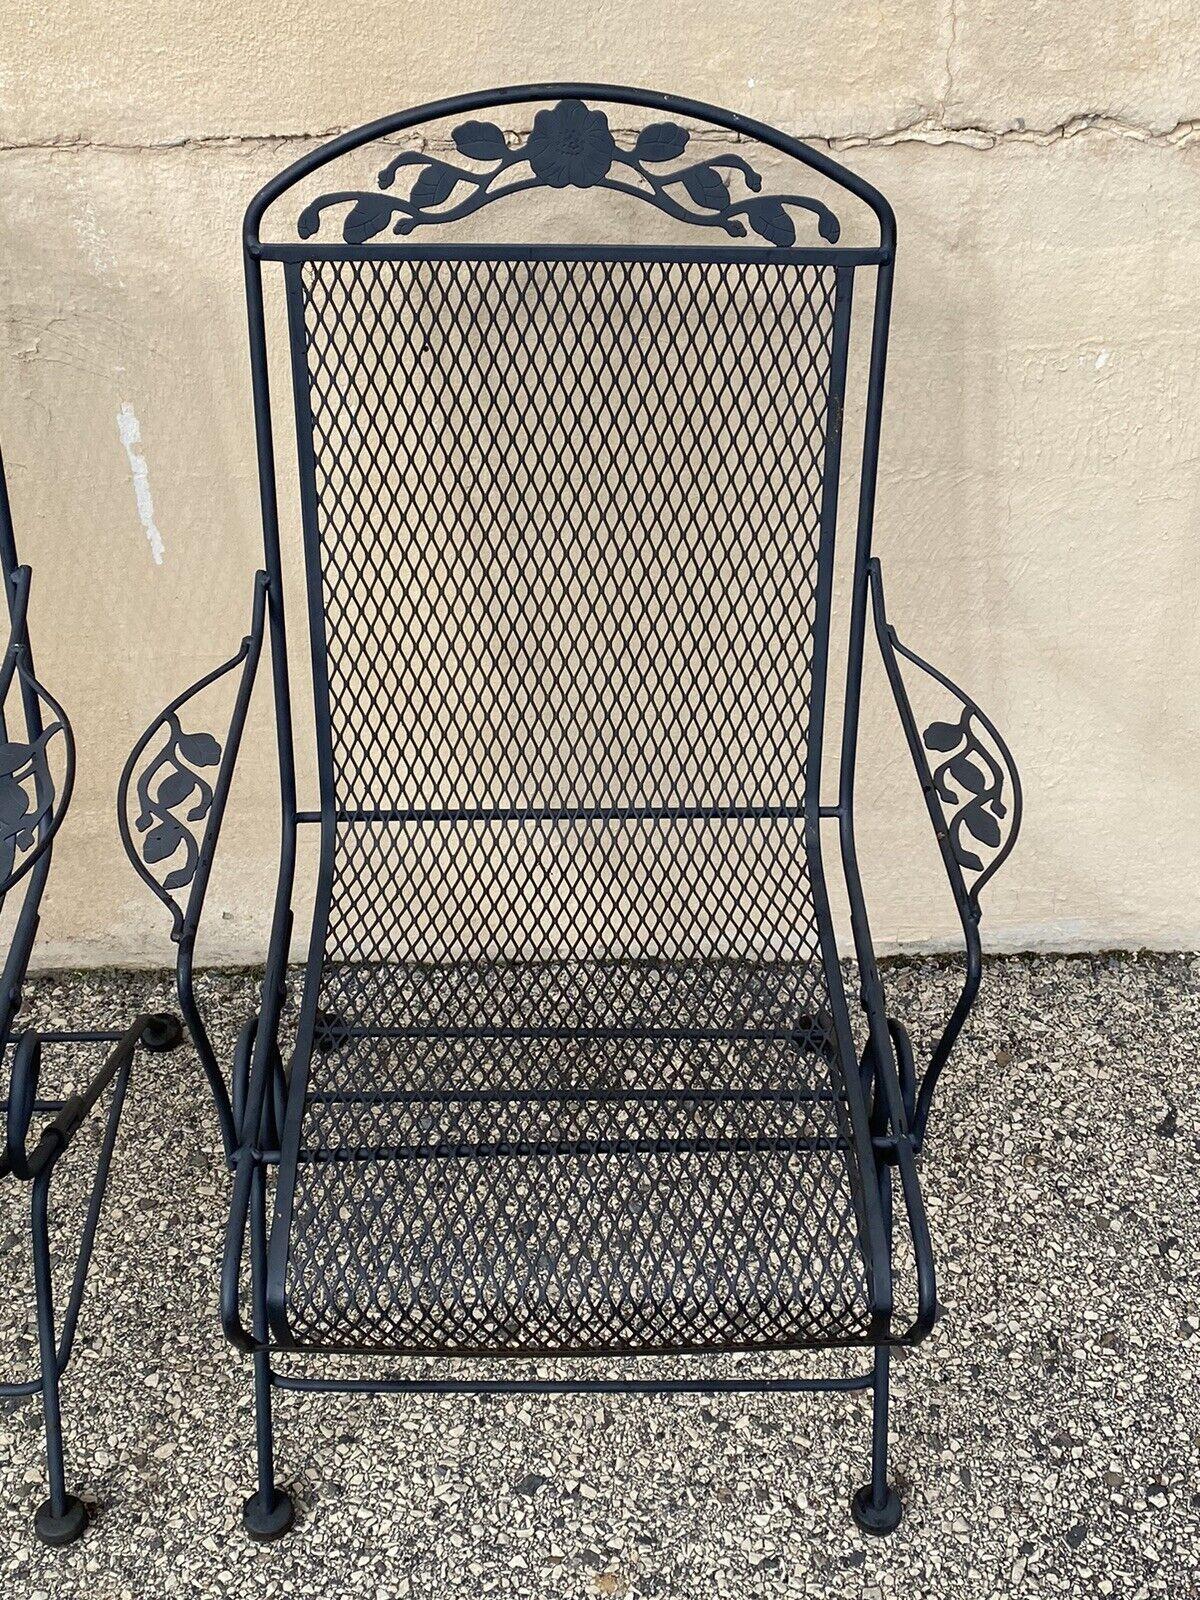 Vintage Woodard Wrought Iron Rose Pattern Springer Patio Arm Chairs - Set of 4 In Good Condition For Sale In Philadelphia, PA